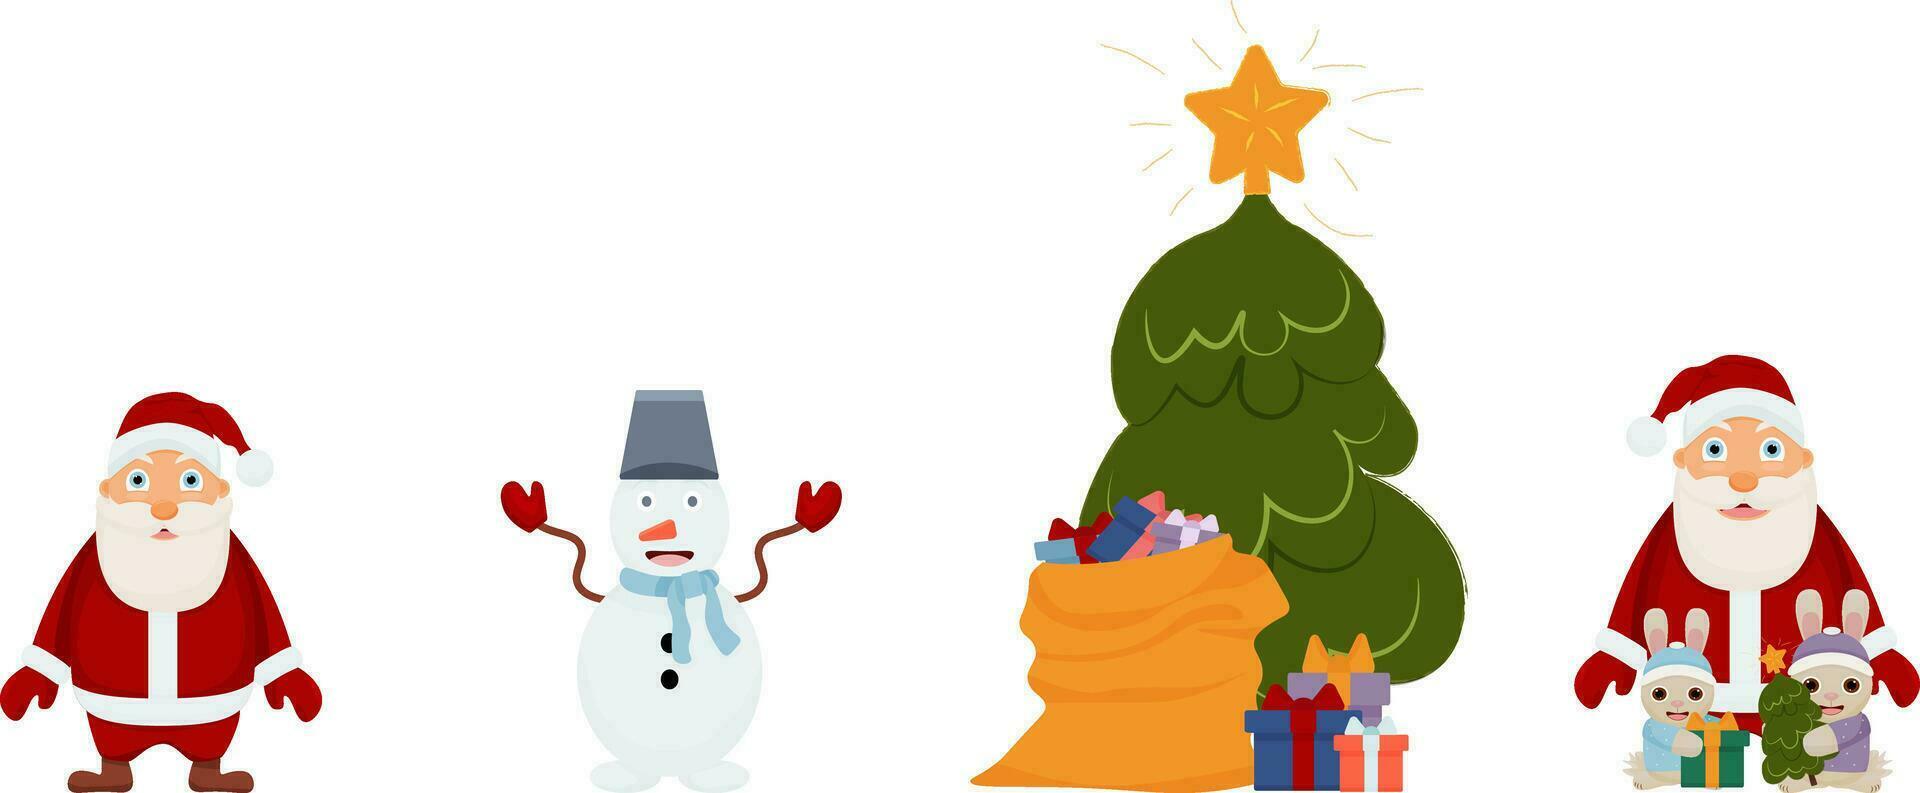 Vector illustration set Santa Claus , a Christmas tree with gifts, a cheerful snowman, cartoon rabbits. Isolated on a white background.